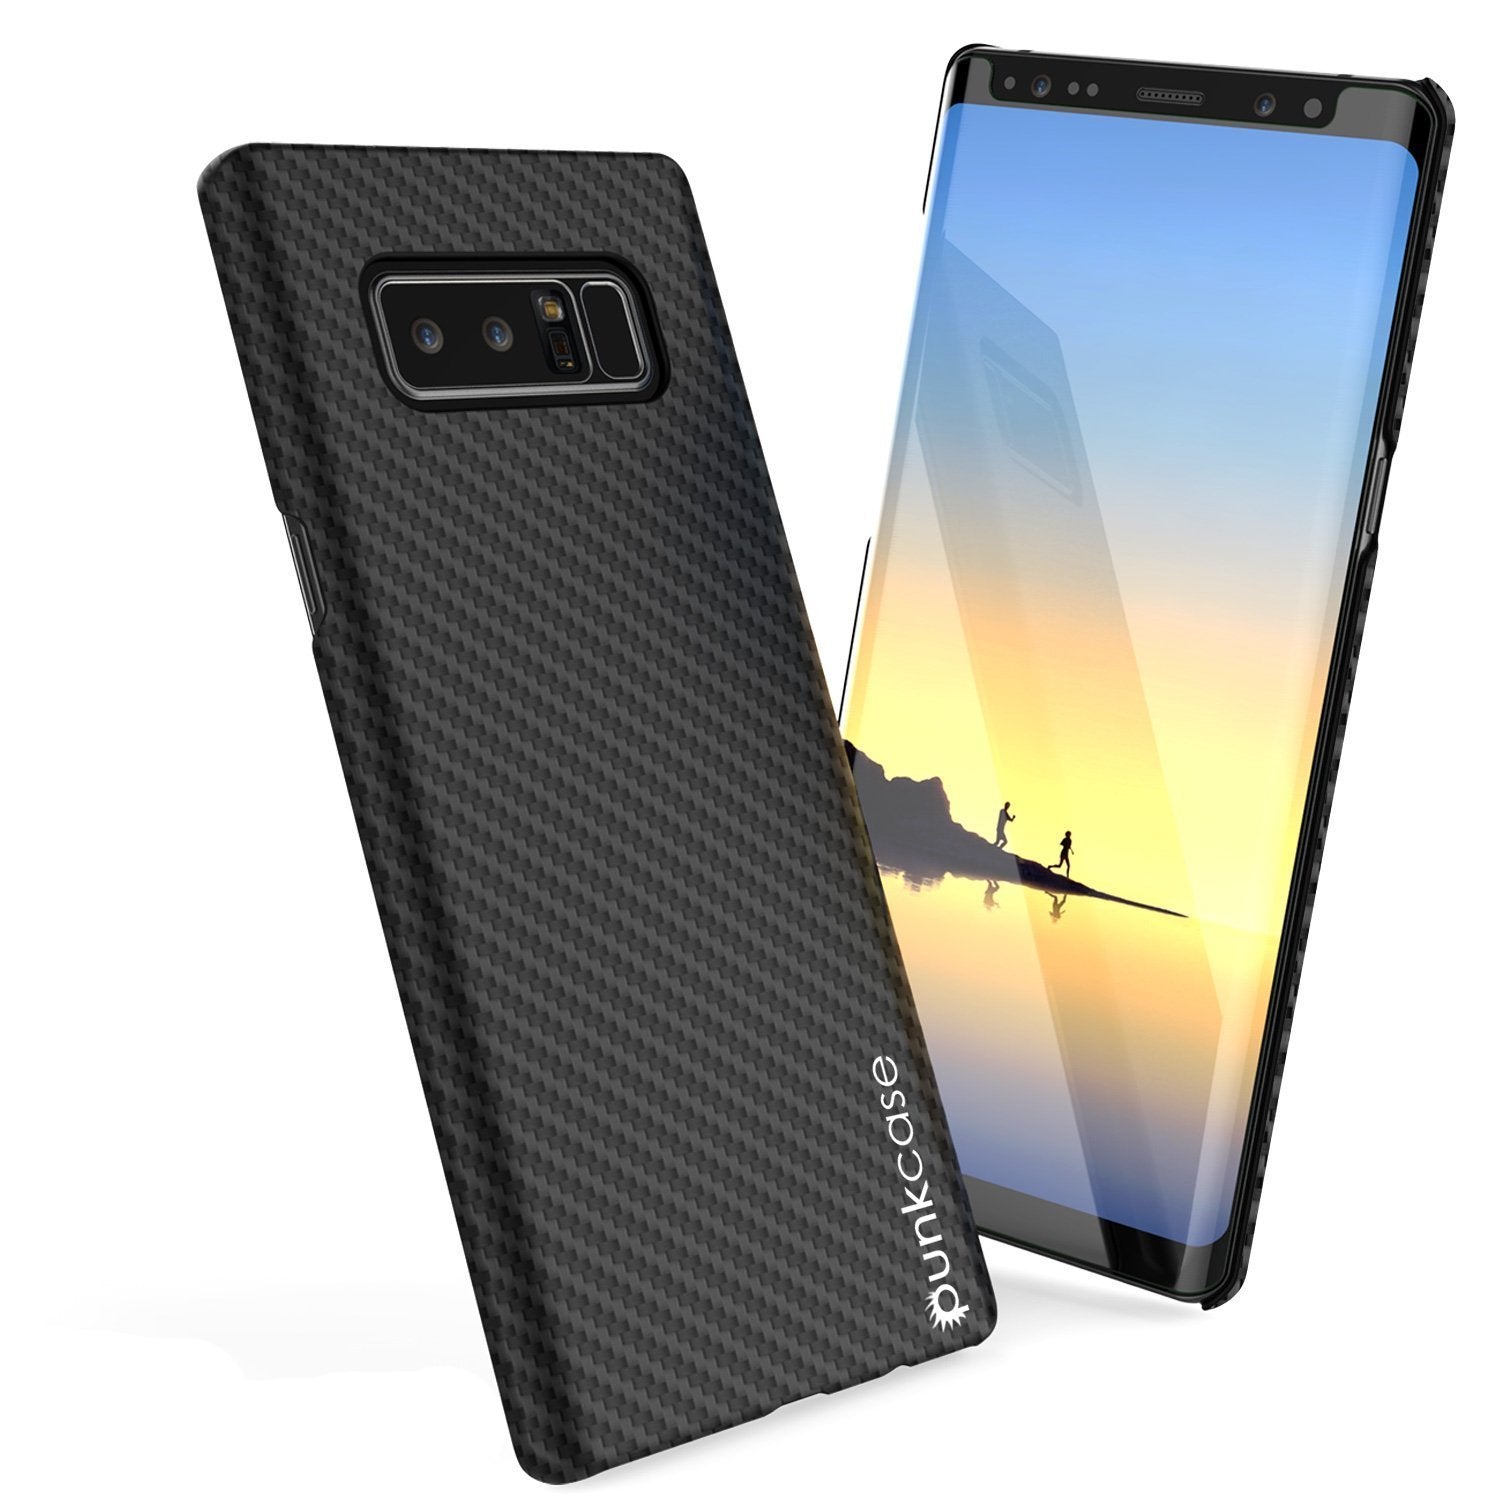 Galaxy Note 8 Case, Punkcase CarbonShield, Heavy Duty & Ultra Thin 2 Piece Dual Layer PU Leather Cover with PUNKSHIELD Screen Protector [jet black]